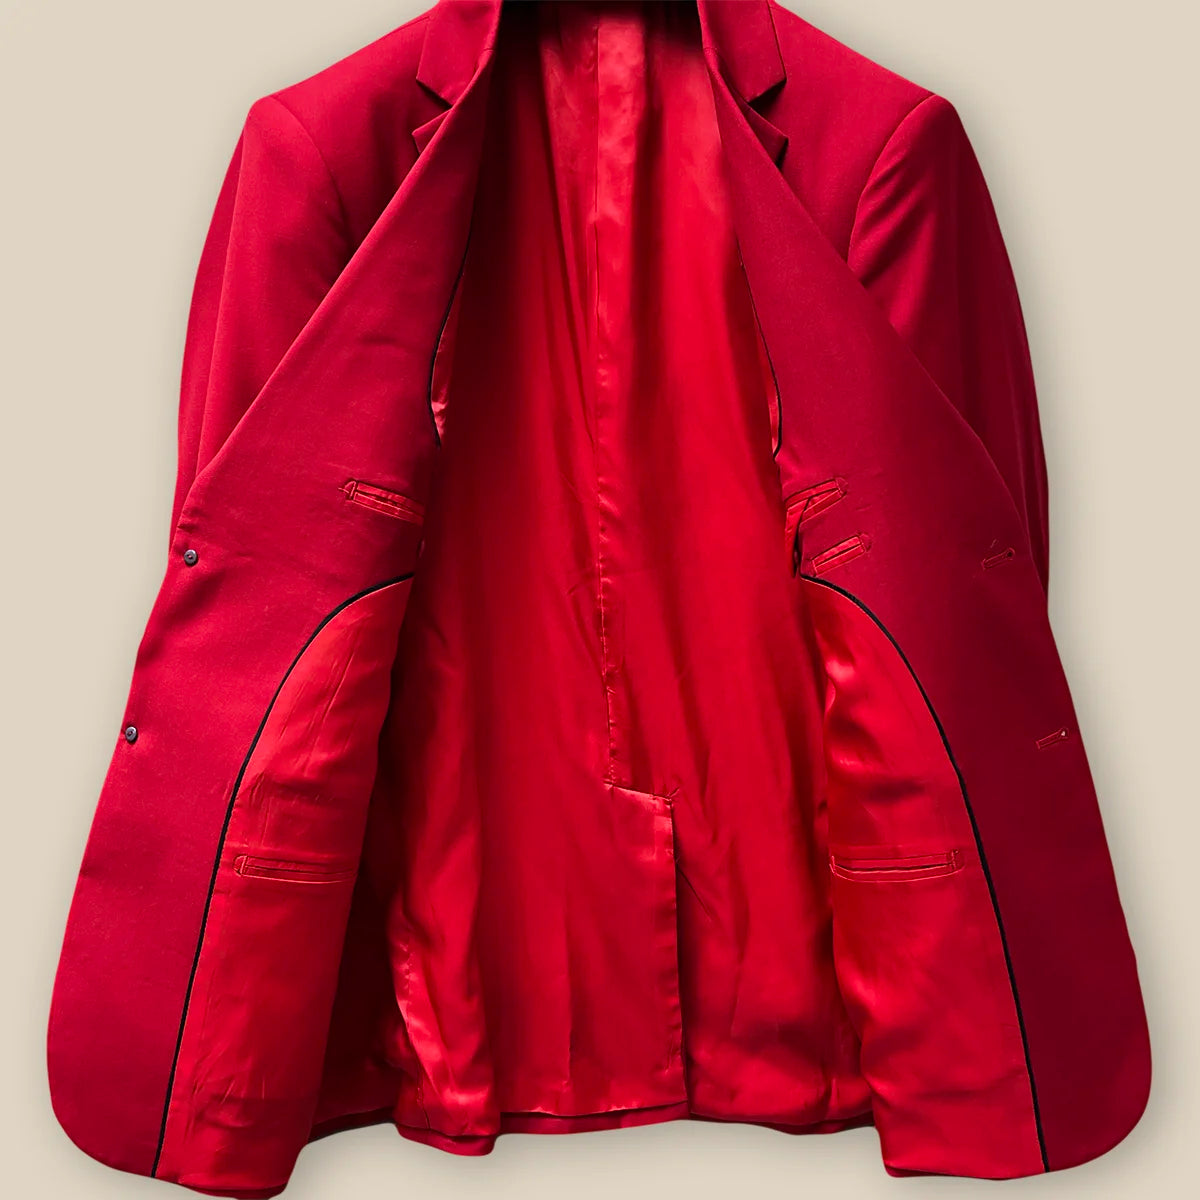 Inside jacket view showing the full interior craftsmanship on a scarlet red, solid plain color suit.